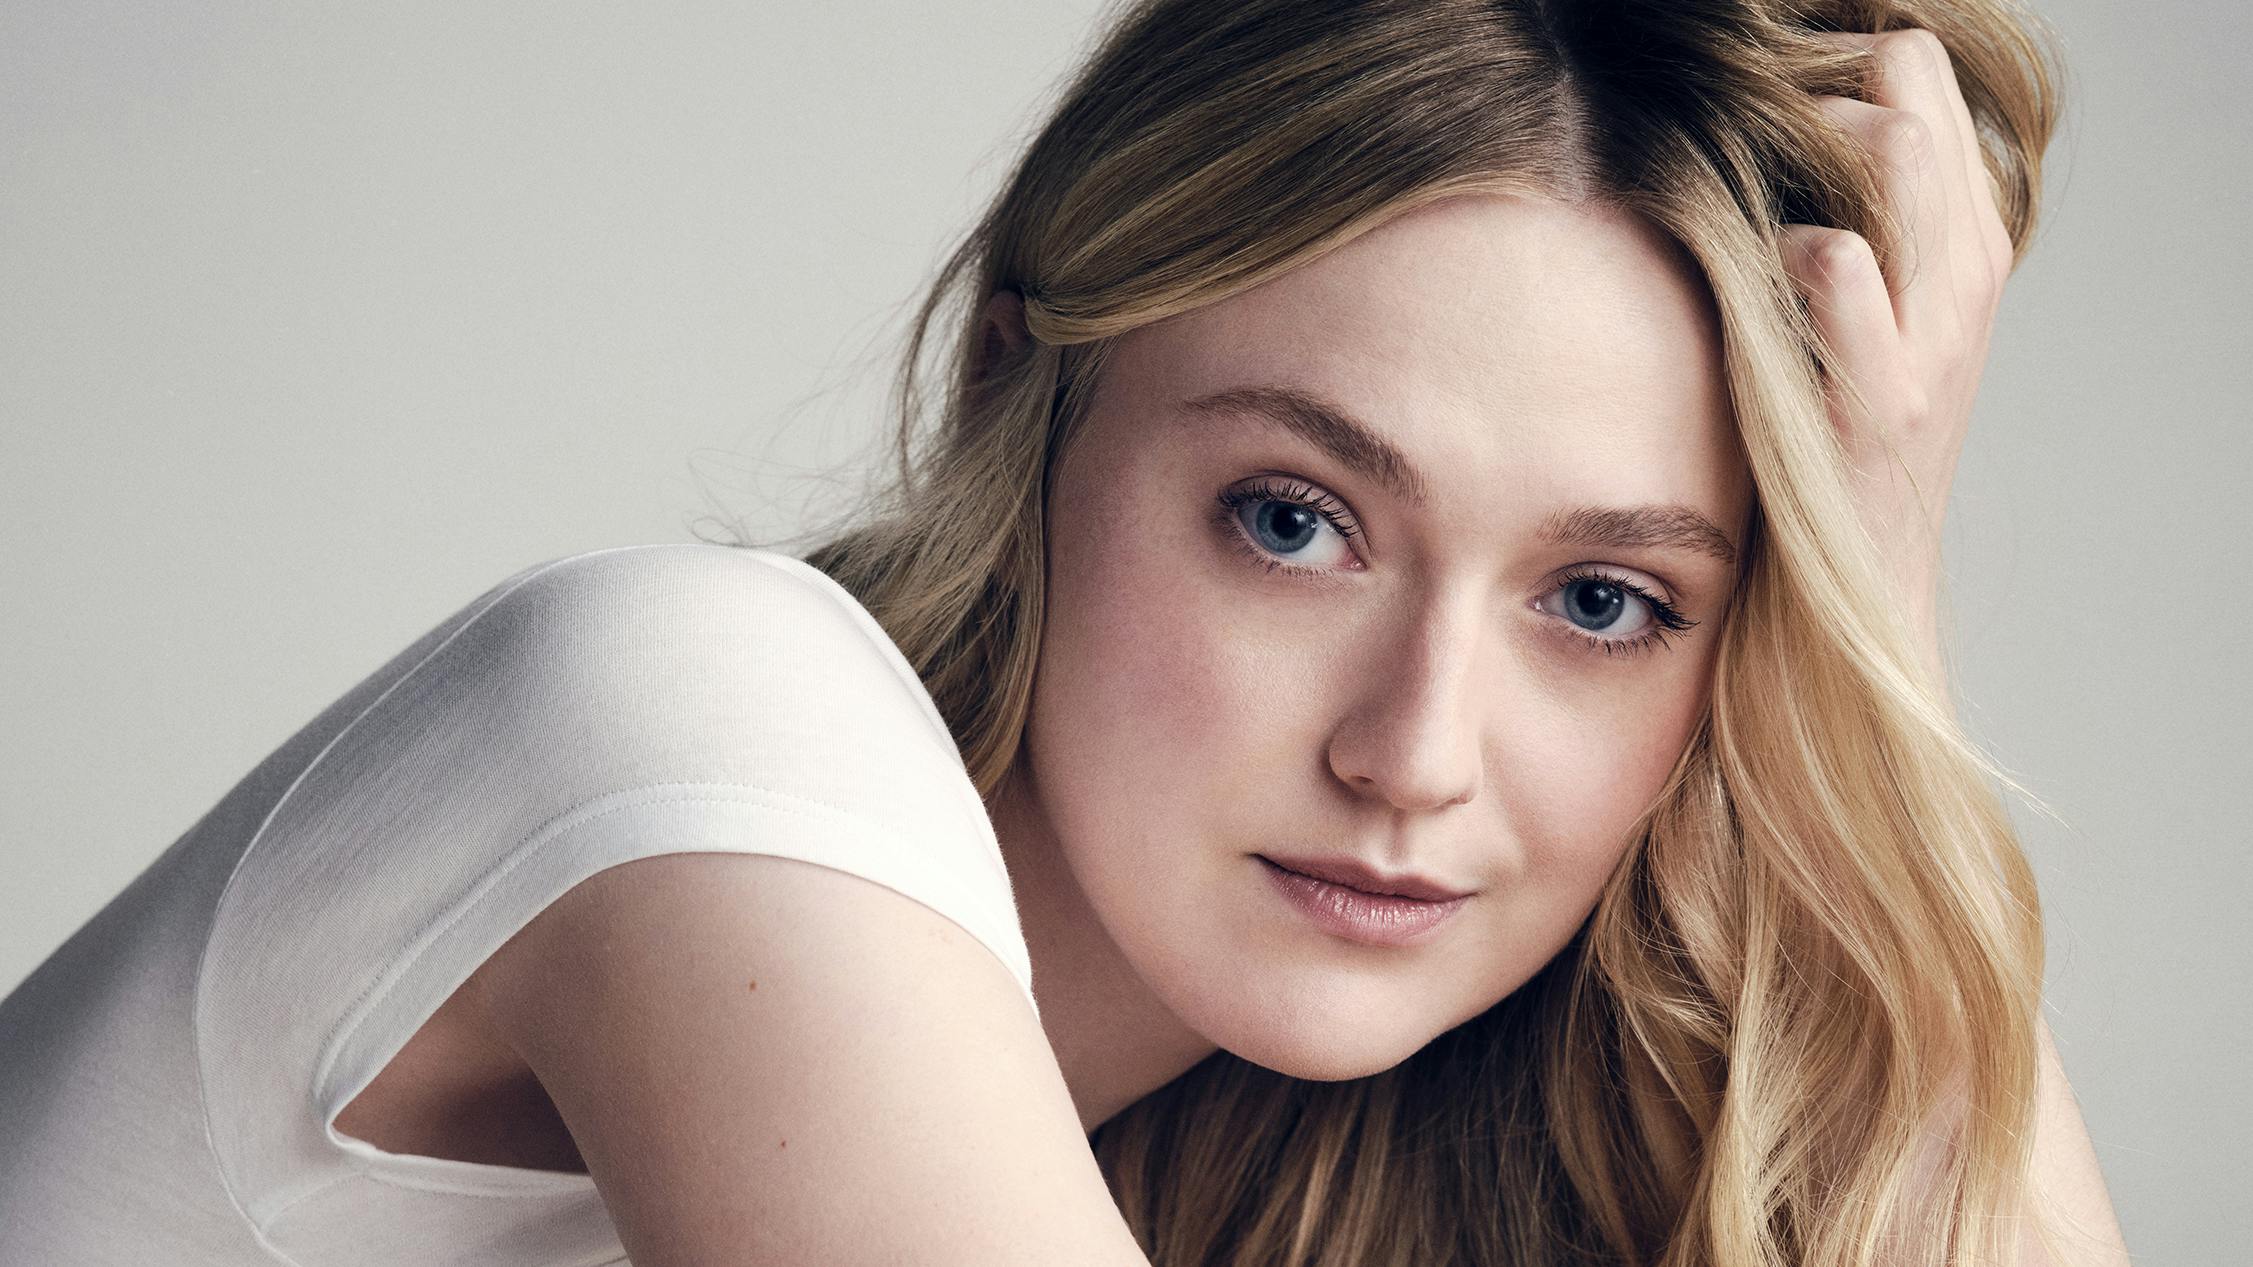 Dakota Fanning wears a white shirt and leans her blond head into her palm.